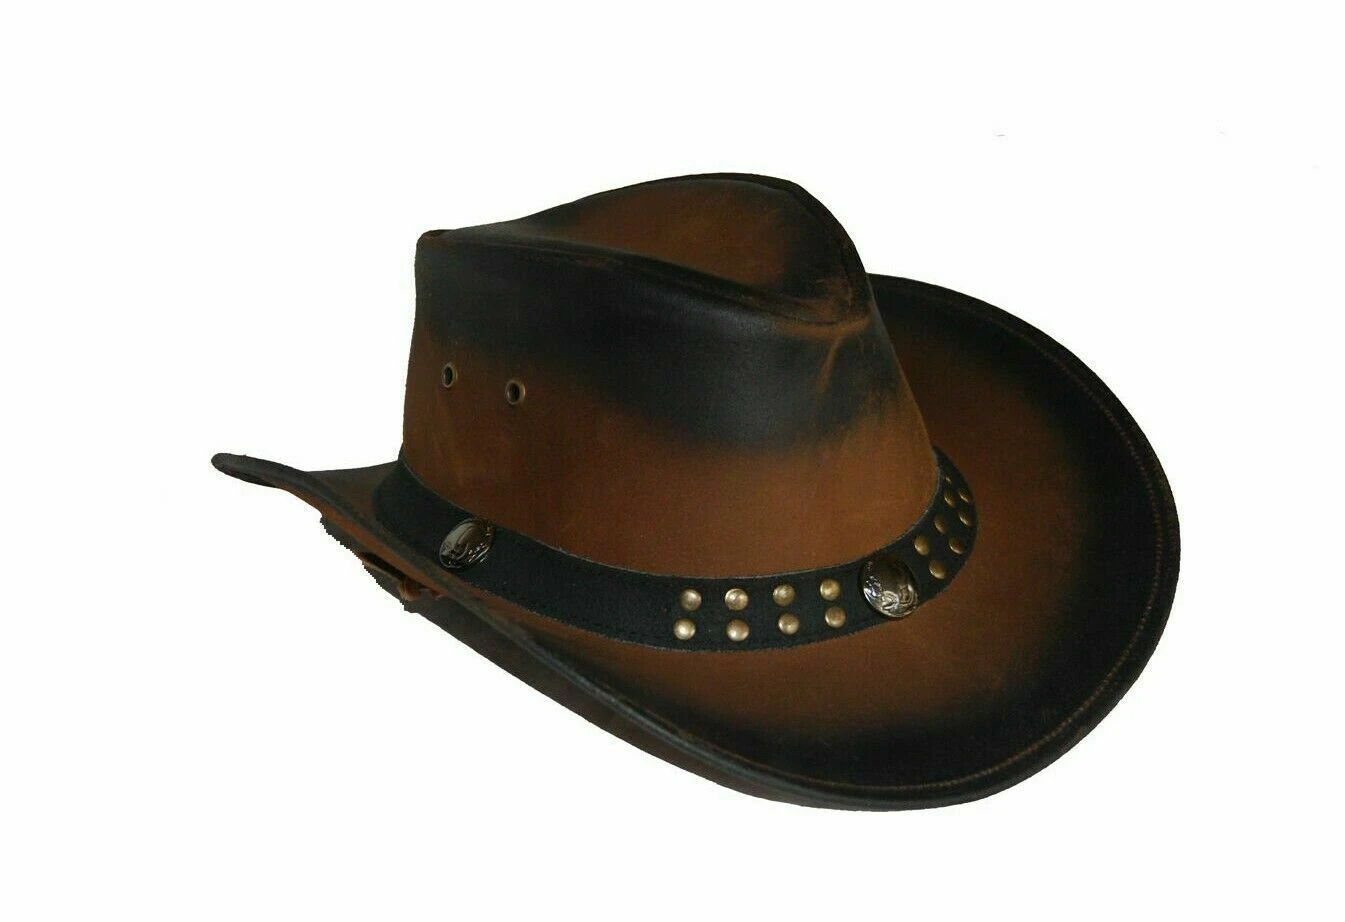 New 2021 Australian Style Faded Leather Cowboy Hat Western Buffalo Coin Hat